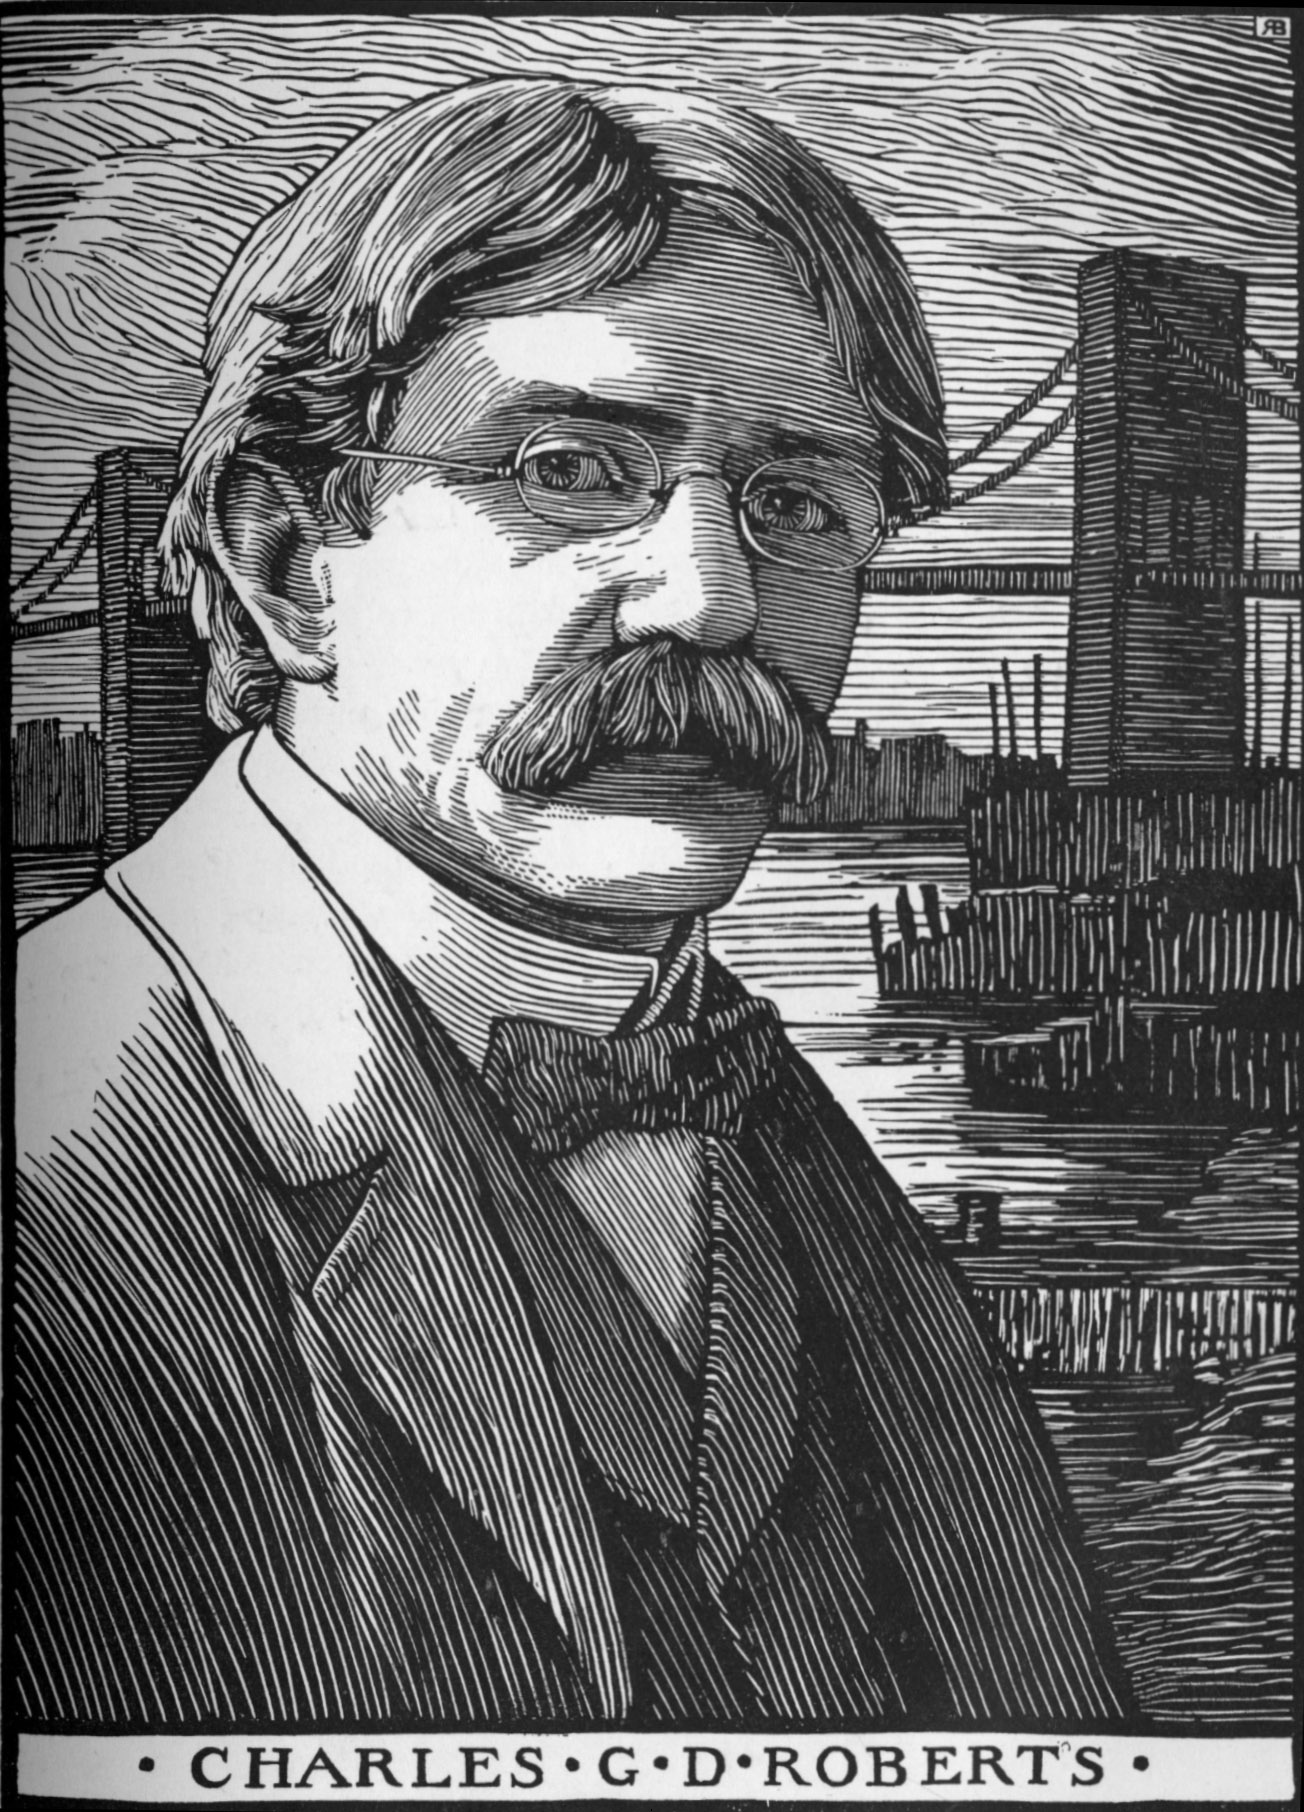 Image is a woodcut of Charles G.D. Roberts. He is shown from the chest up with about a ¾ face position. He is wearing oval glasses, and his hair is wavy and parted off centre on the right side. He has a large moustache and is clean-shaved elsewhere. His gaze is directed at the viewer. He is wearing a stiff collared white shirt, a bowtie, a vest, and a blazer. In the background is a lake and a suspension bridge. The image is vertically displayed.